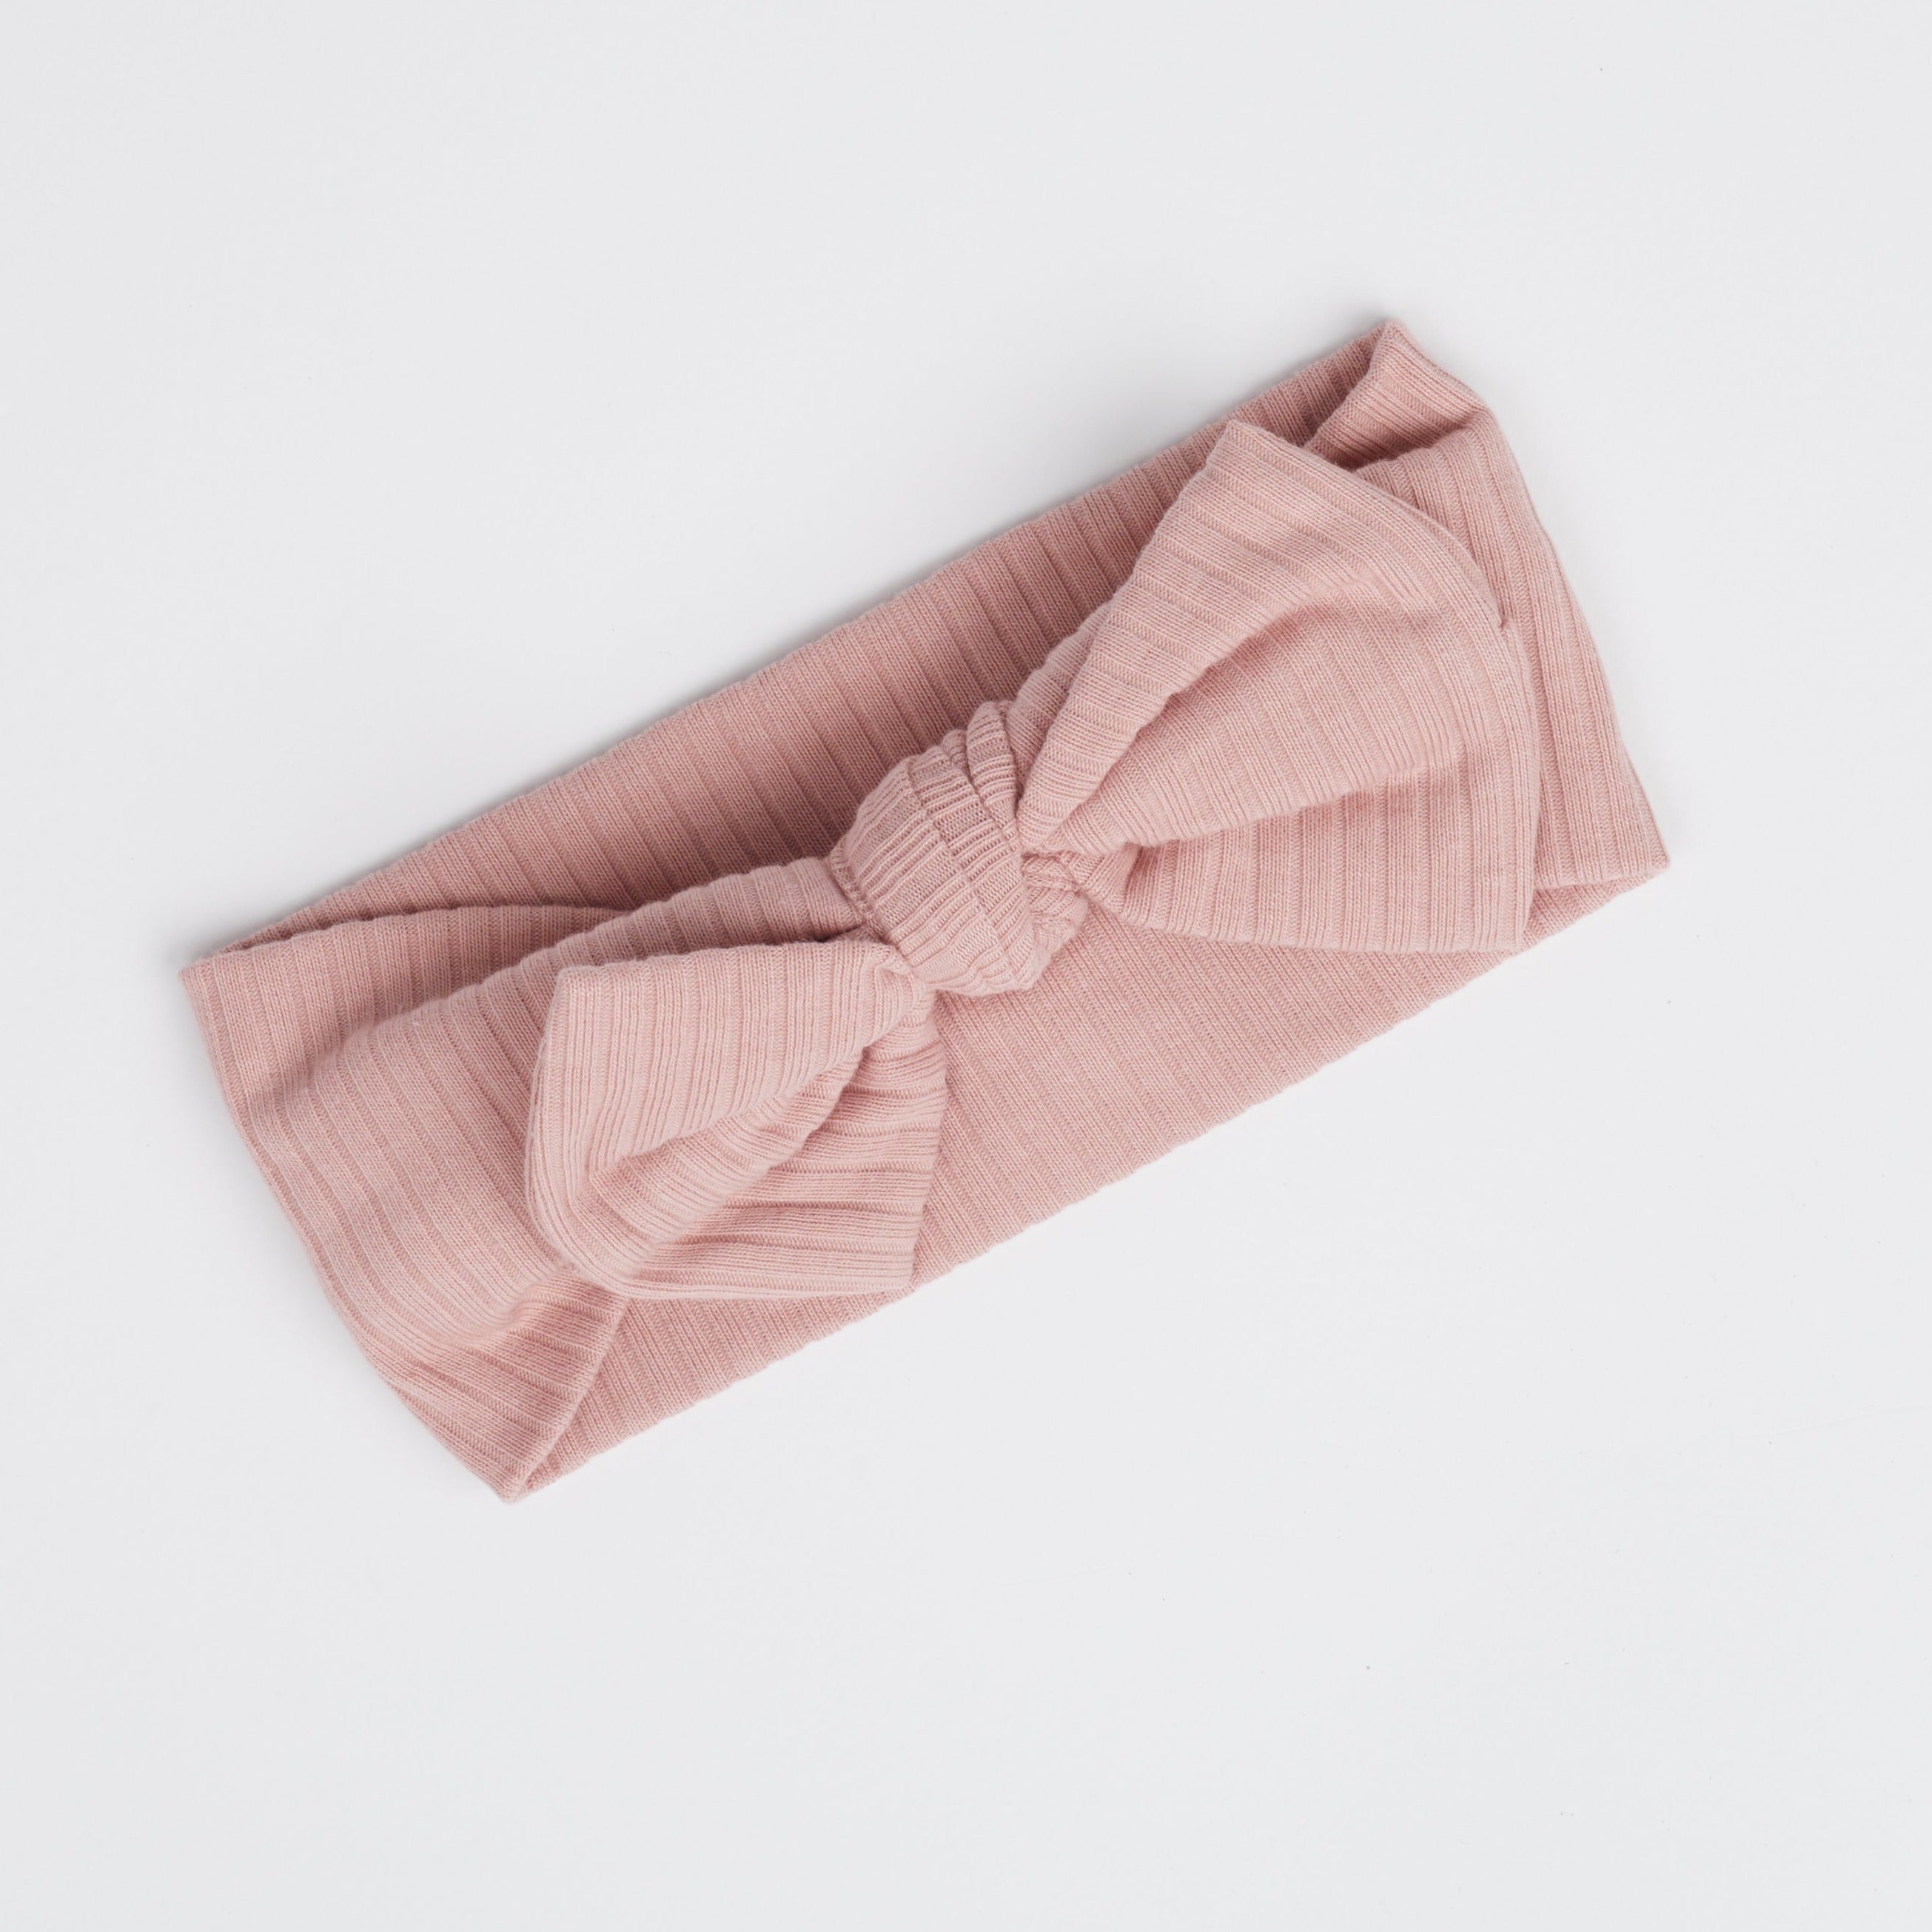 The Blair Pink Baby Bow Headband against a white background.